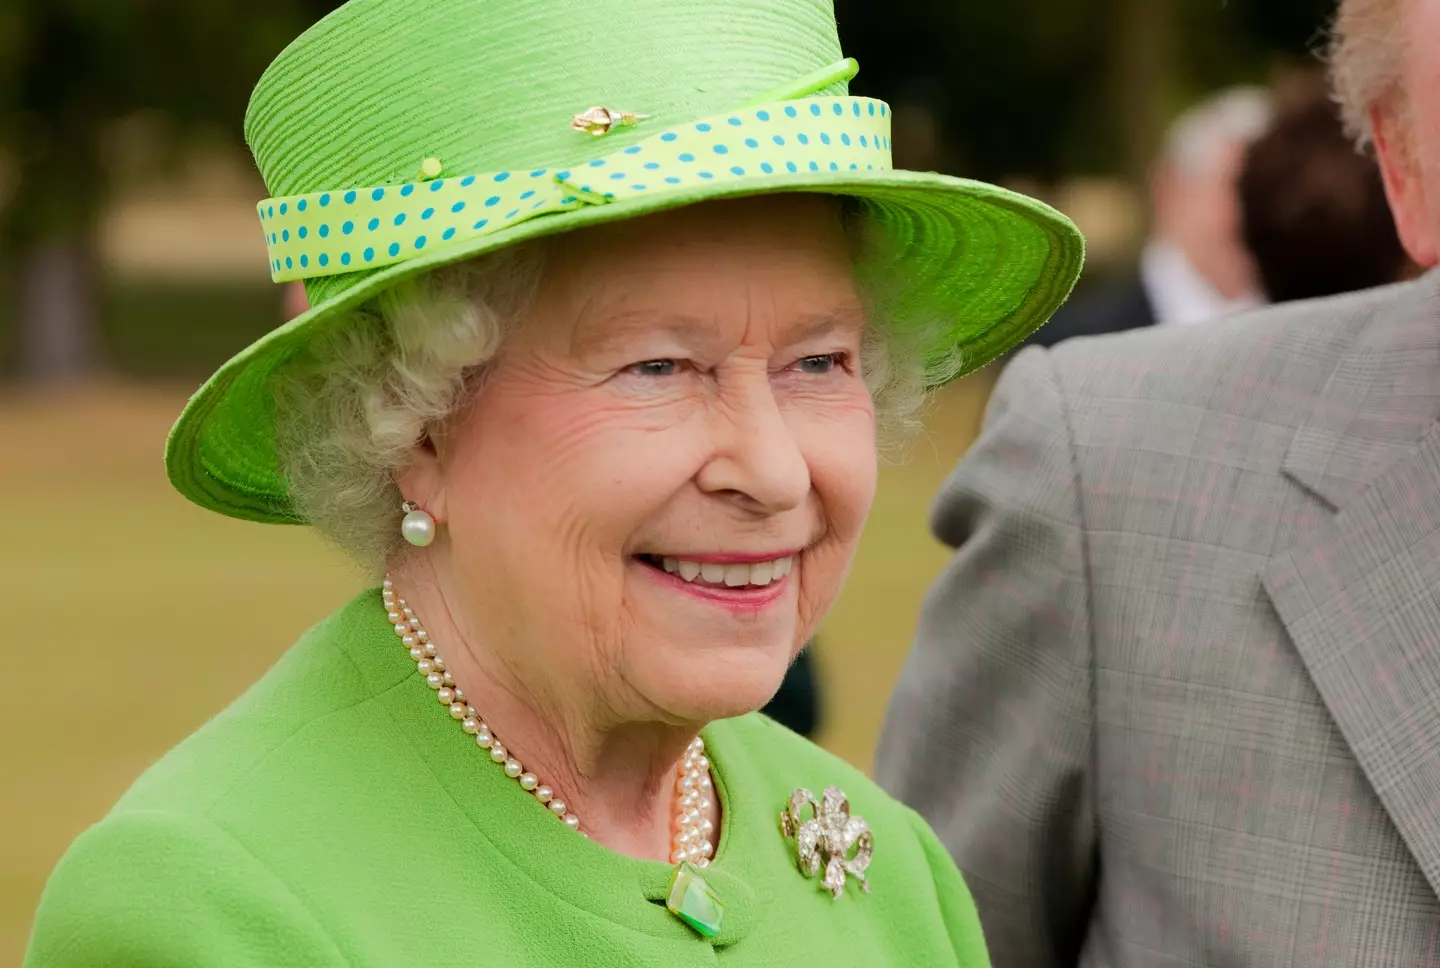 The UK has gained eight cities in honour of the Queen's Platinum Jubilee.